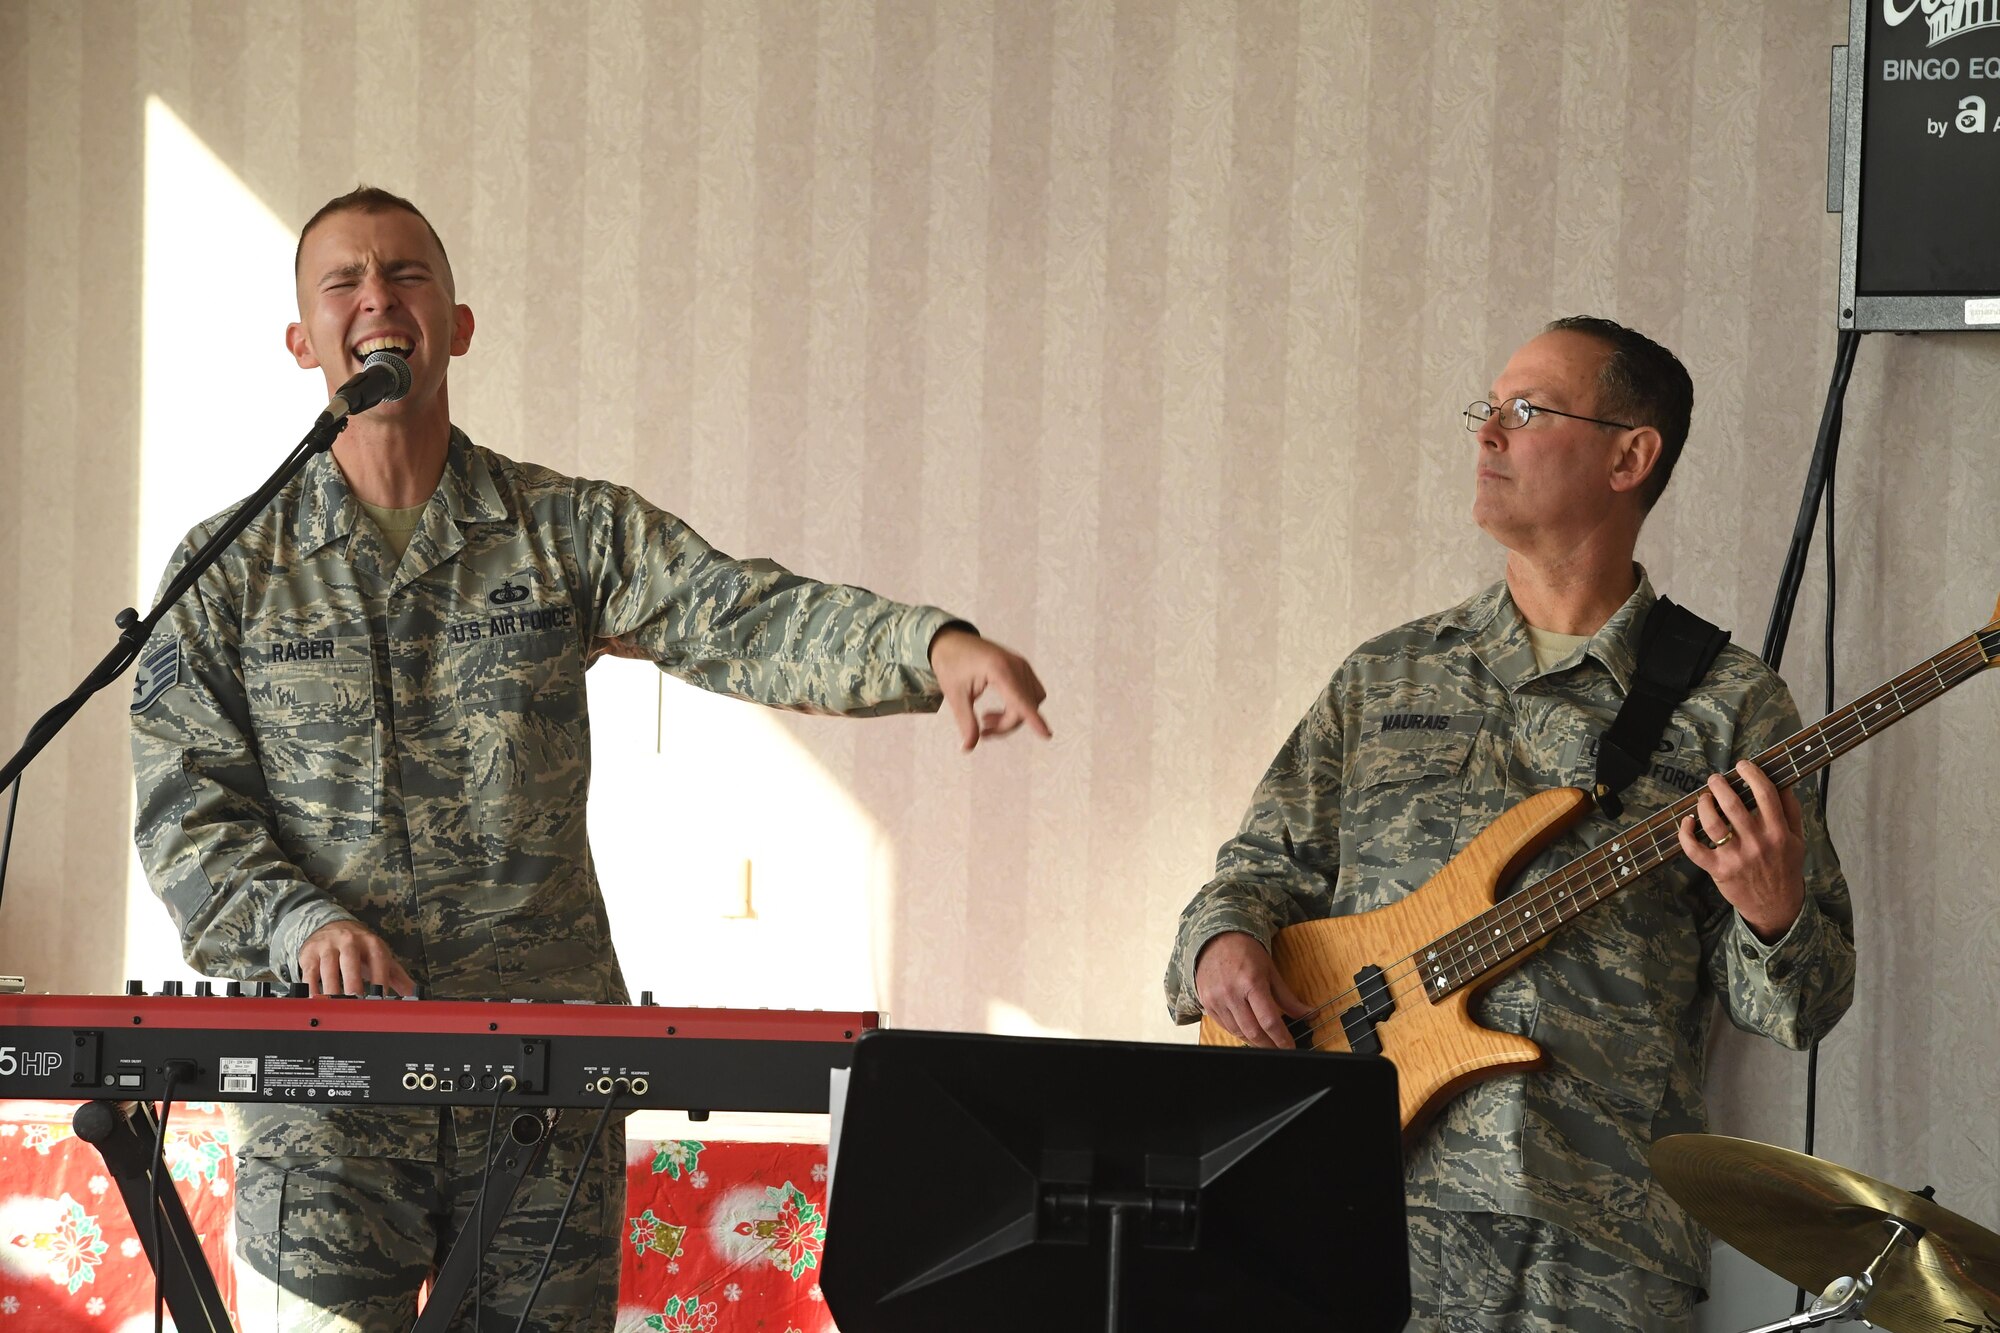 Staff Sgt. Ryan Rager, a keyboard player and vocalist with the U.S. Air Force Heritage of America Band, and Master Sgt. Kenny Maurais, a bassist with the United States Air Force Heritage of America Band, perform during a holiday concert at the Hampton Veteran’s Medical Center, Jan. 7, 2016. The Blue Aces are Airman-musicians who perform a diverse mix of American artists from the past and present. (U.S. Air Force photo by Staff Sgt. Nick Wilson)